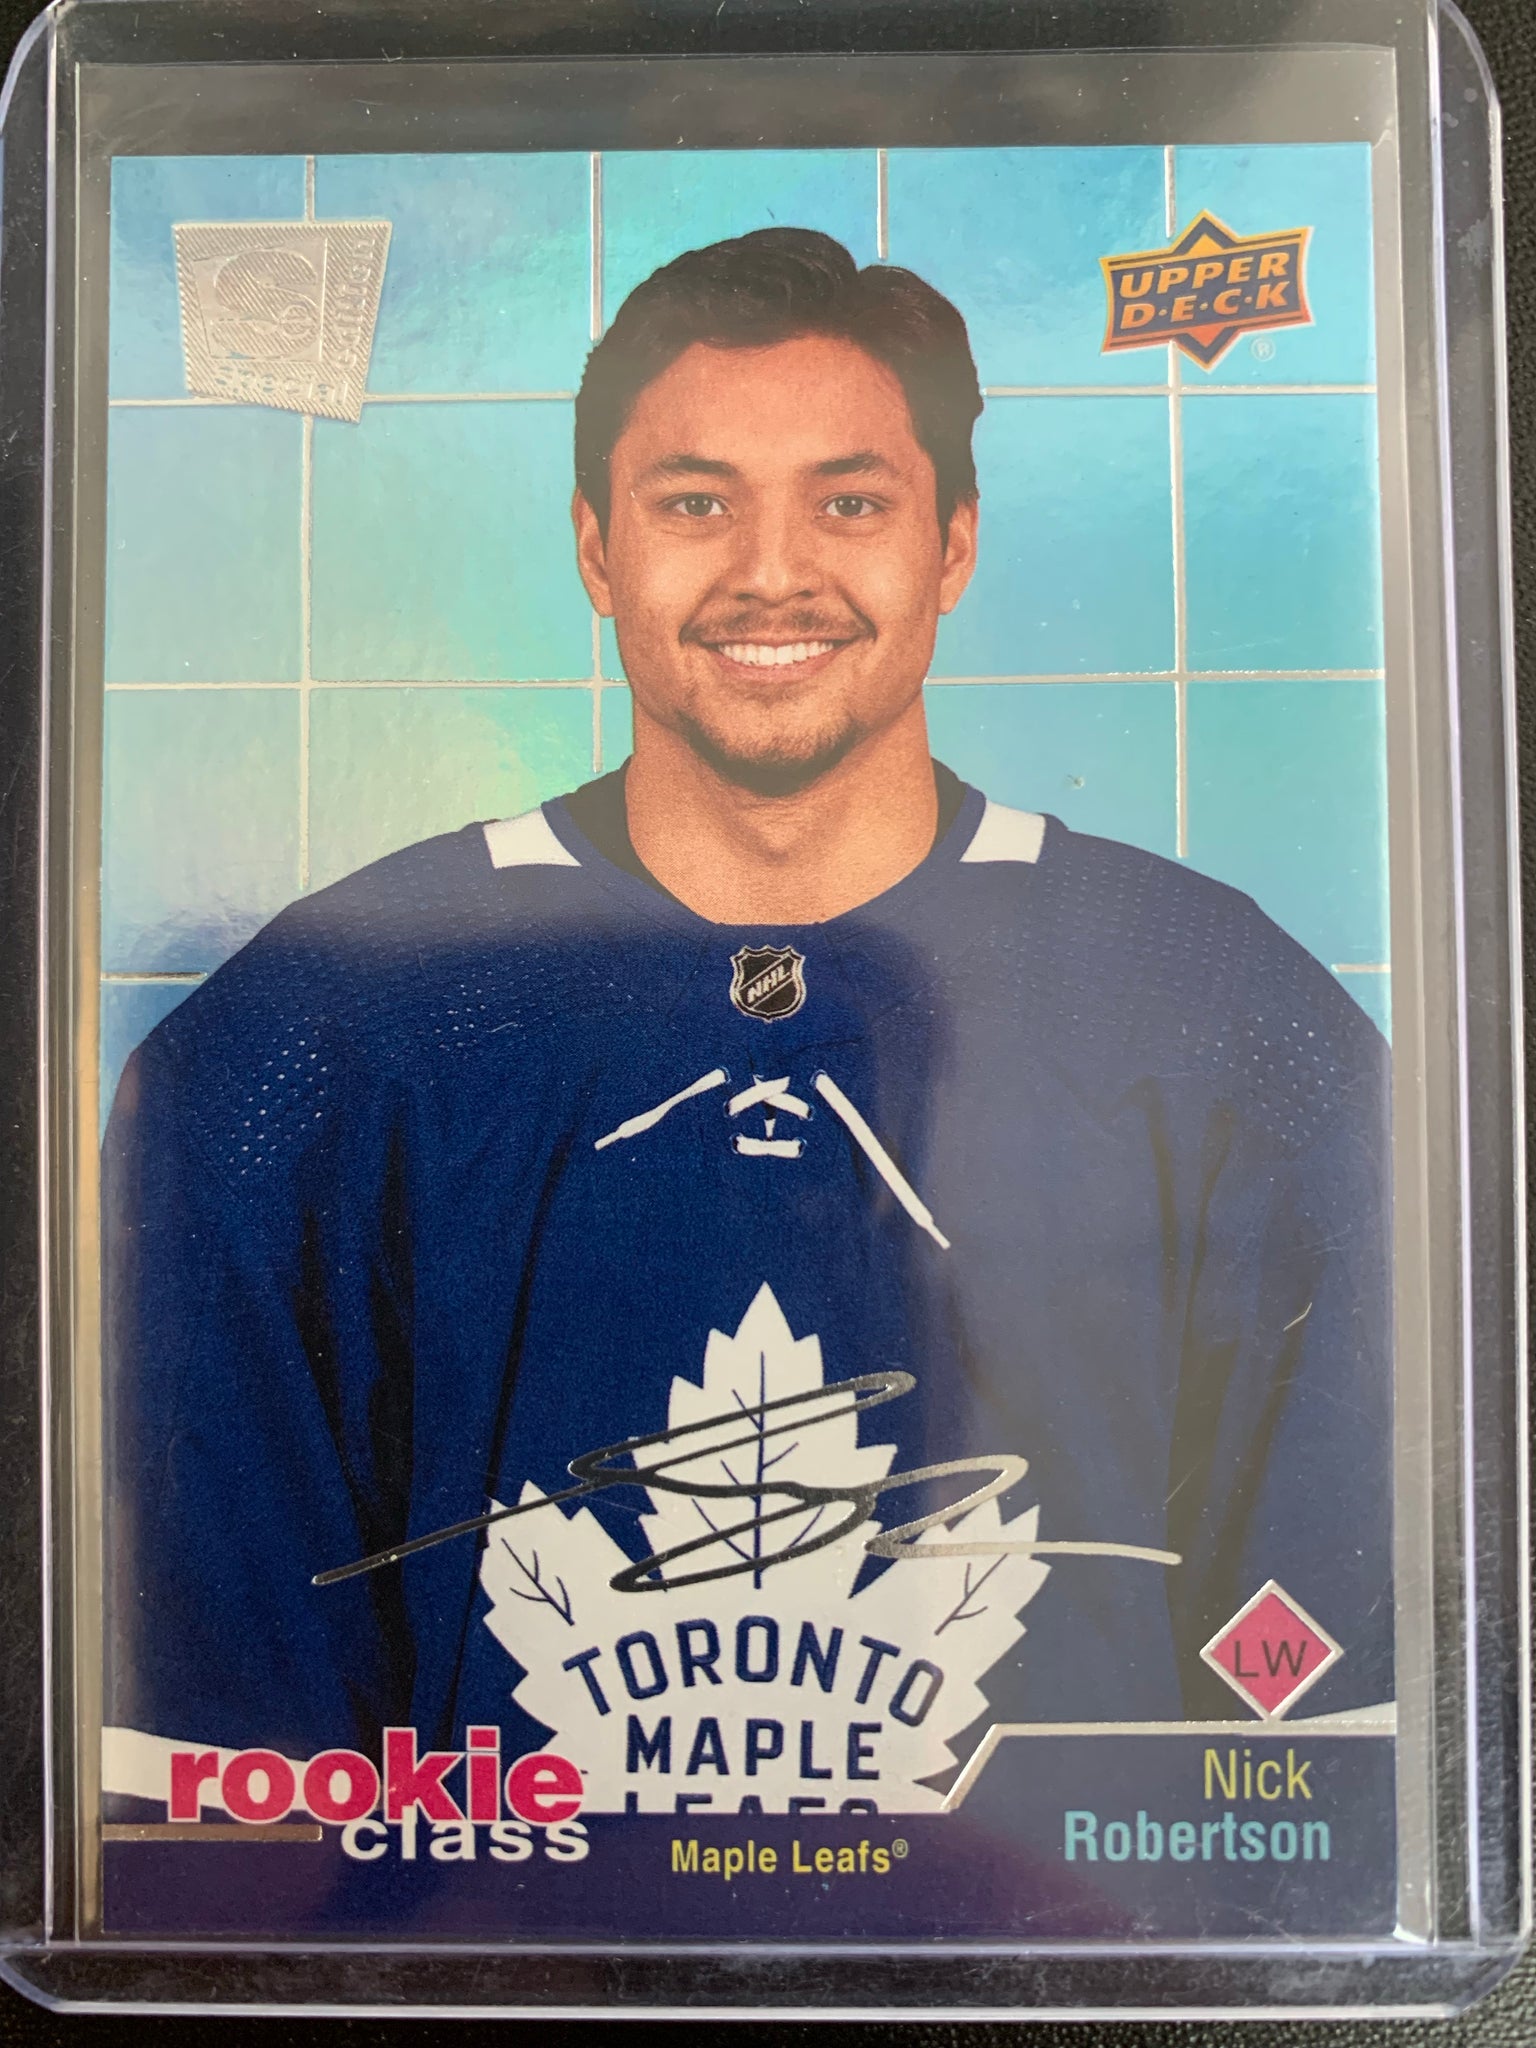 2020-21 UPPER DECK EXTENDED HOCKEY #RC-20 TORONTO MAPLE LEAFS - NICK ROBERTSON ROOKIE CLASS ROOKIE CARD